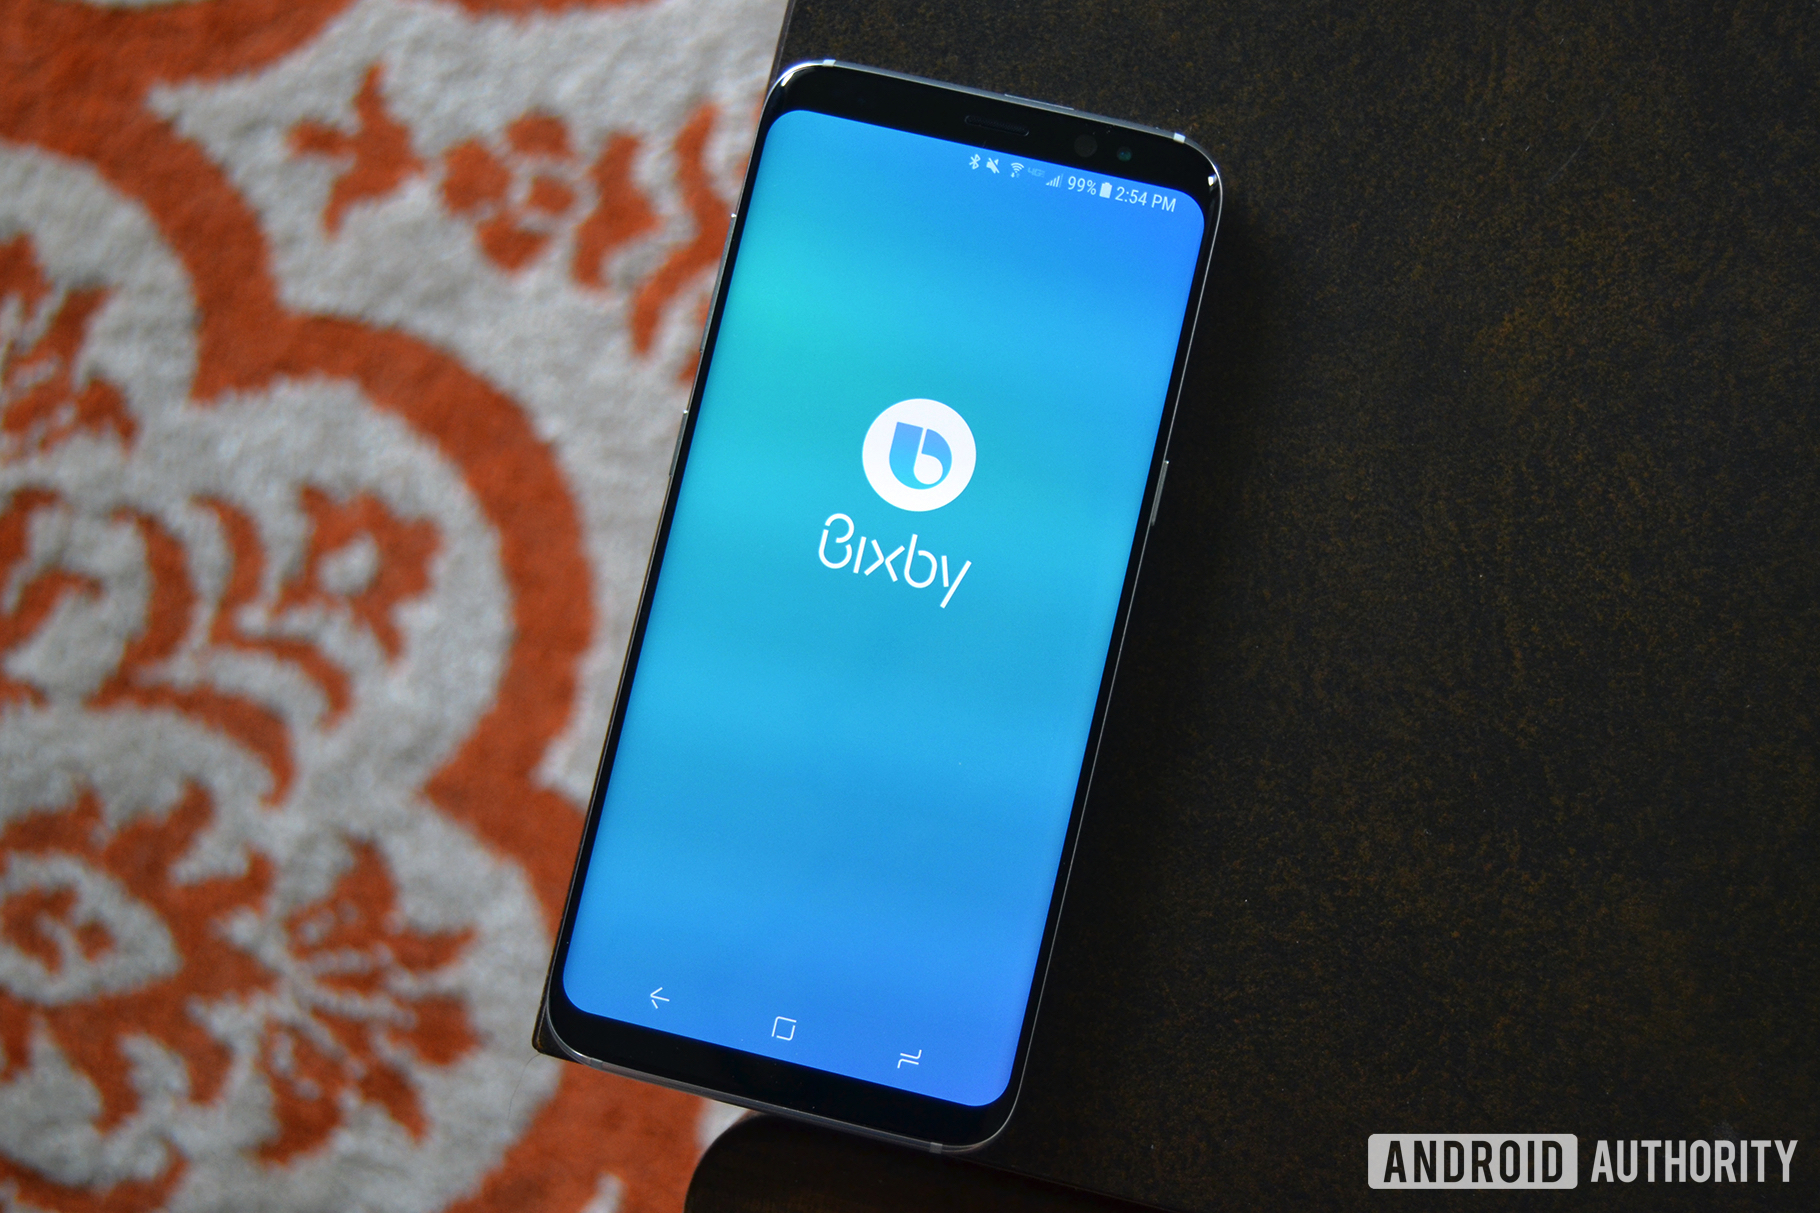 Samsung Bixby guide: Features, commands, and more - Android Authority